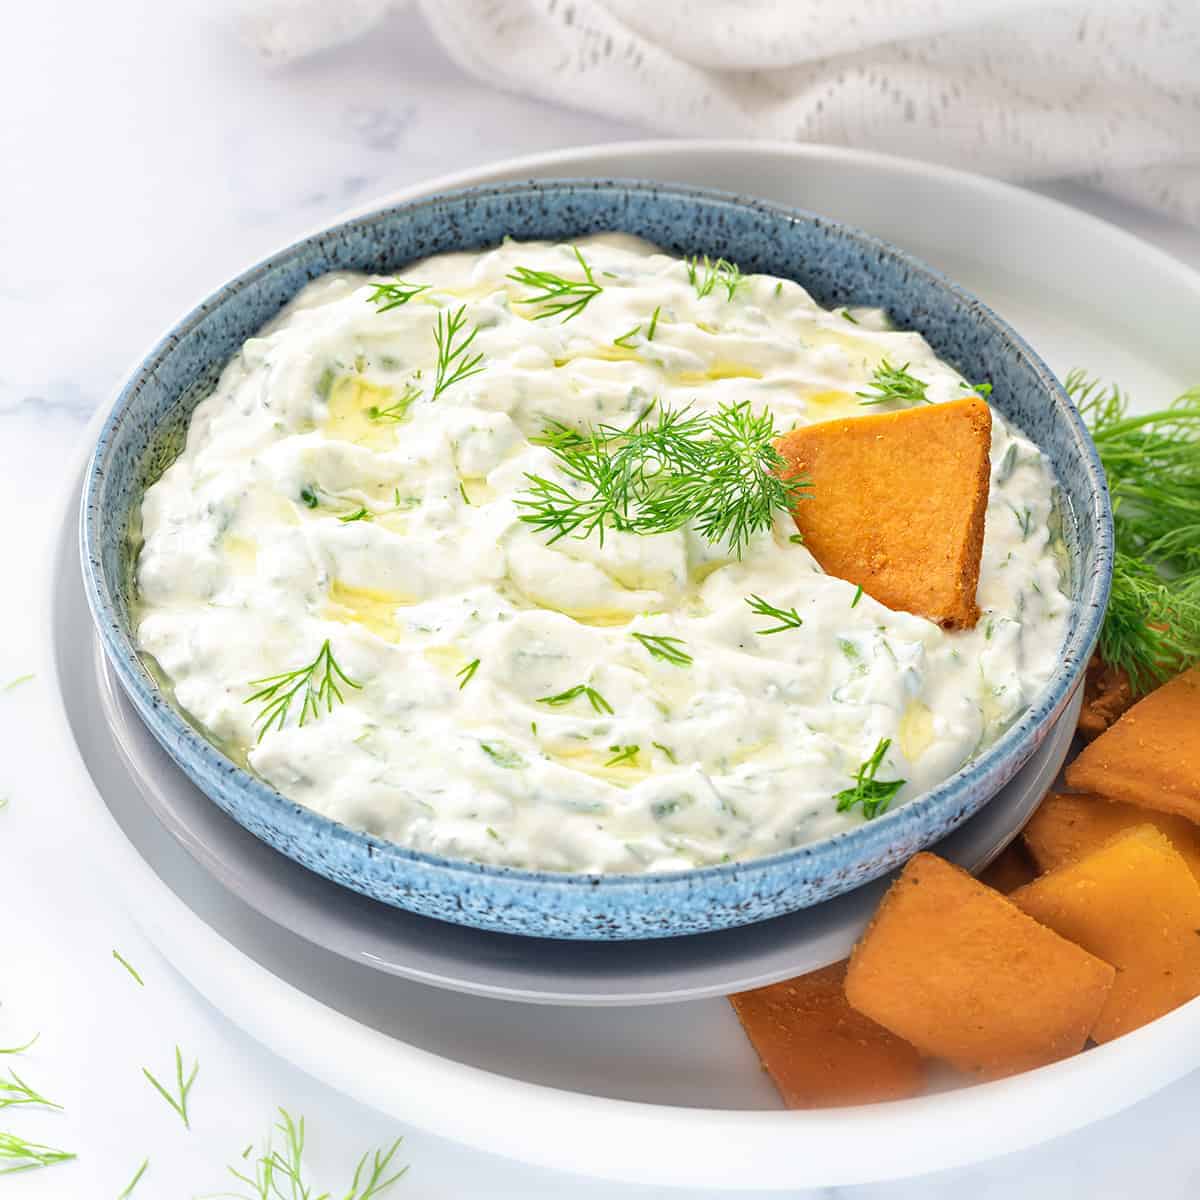 Authentic Greek Tzatziki sauce served in blue bowl with some pita chips on the side.